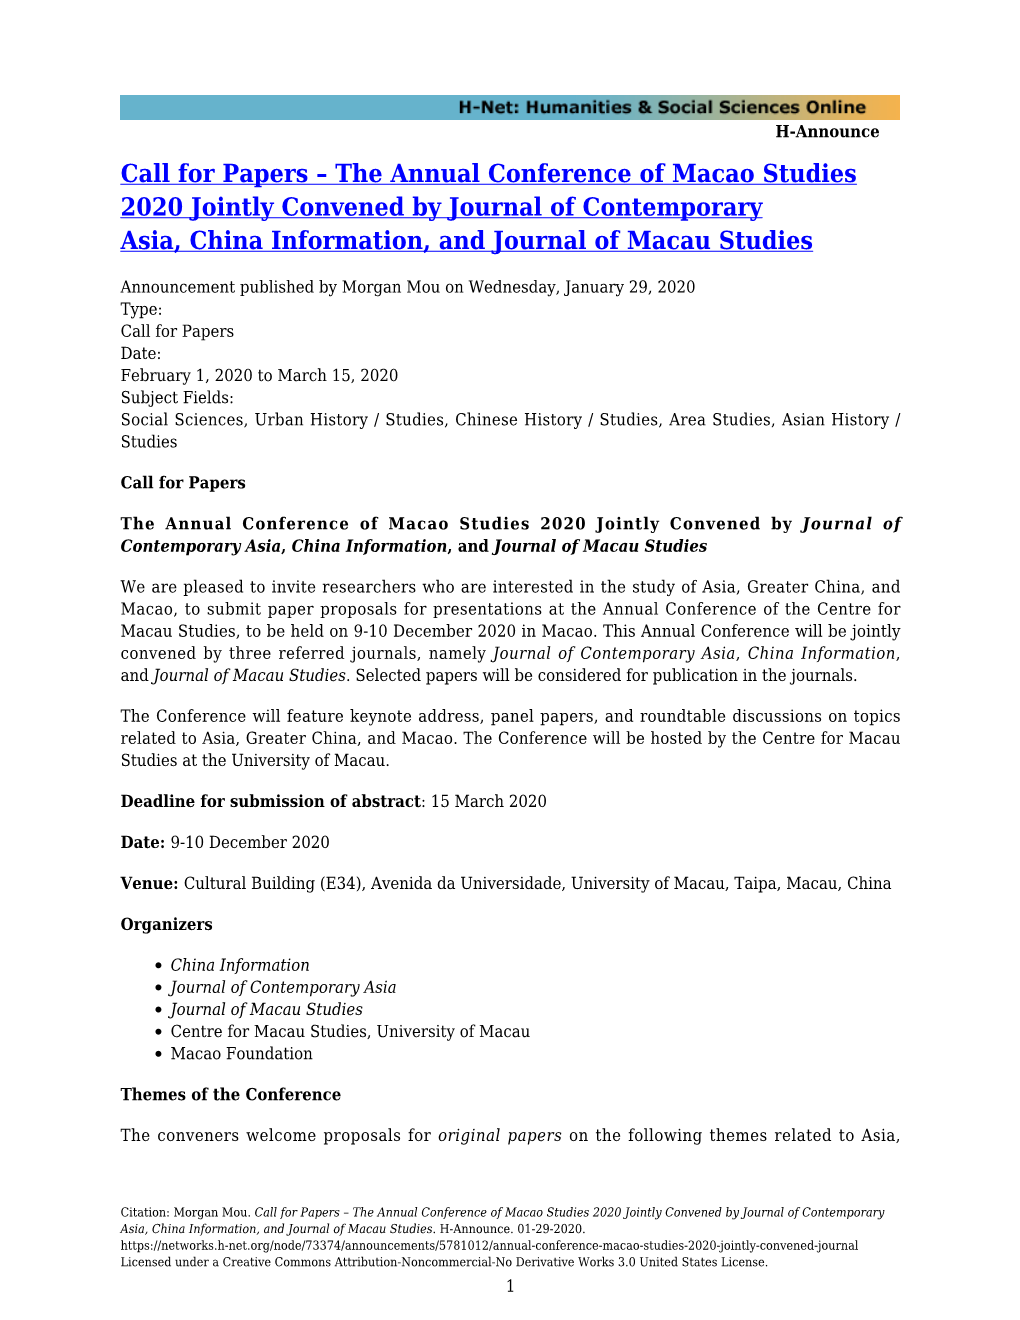 The Annual Conference of Macao Studies 2020 Jointly Convened by Journal of Contemporary Asia, China Information, and Journal of Macau Studies